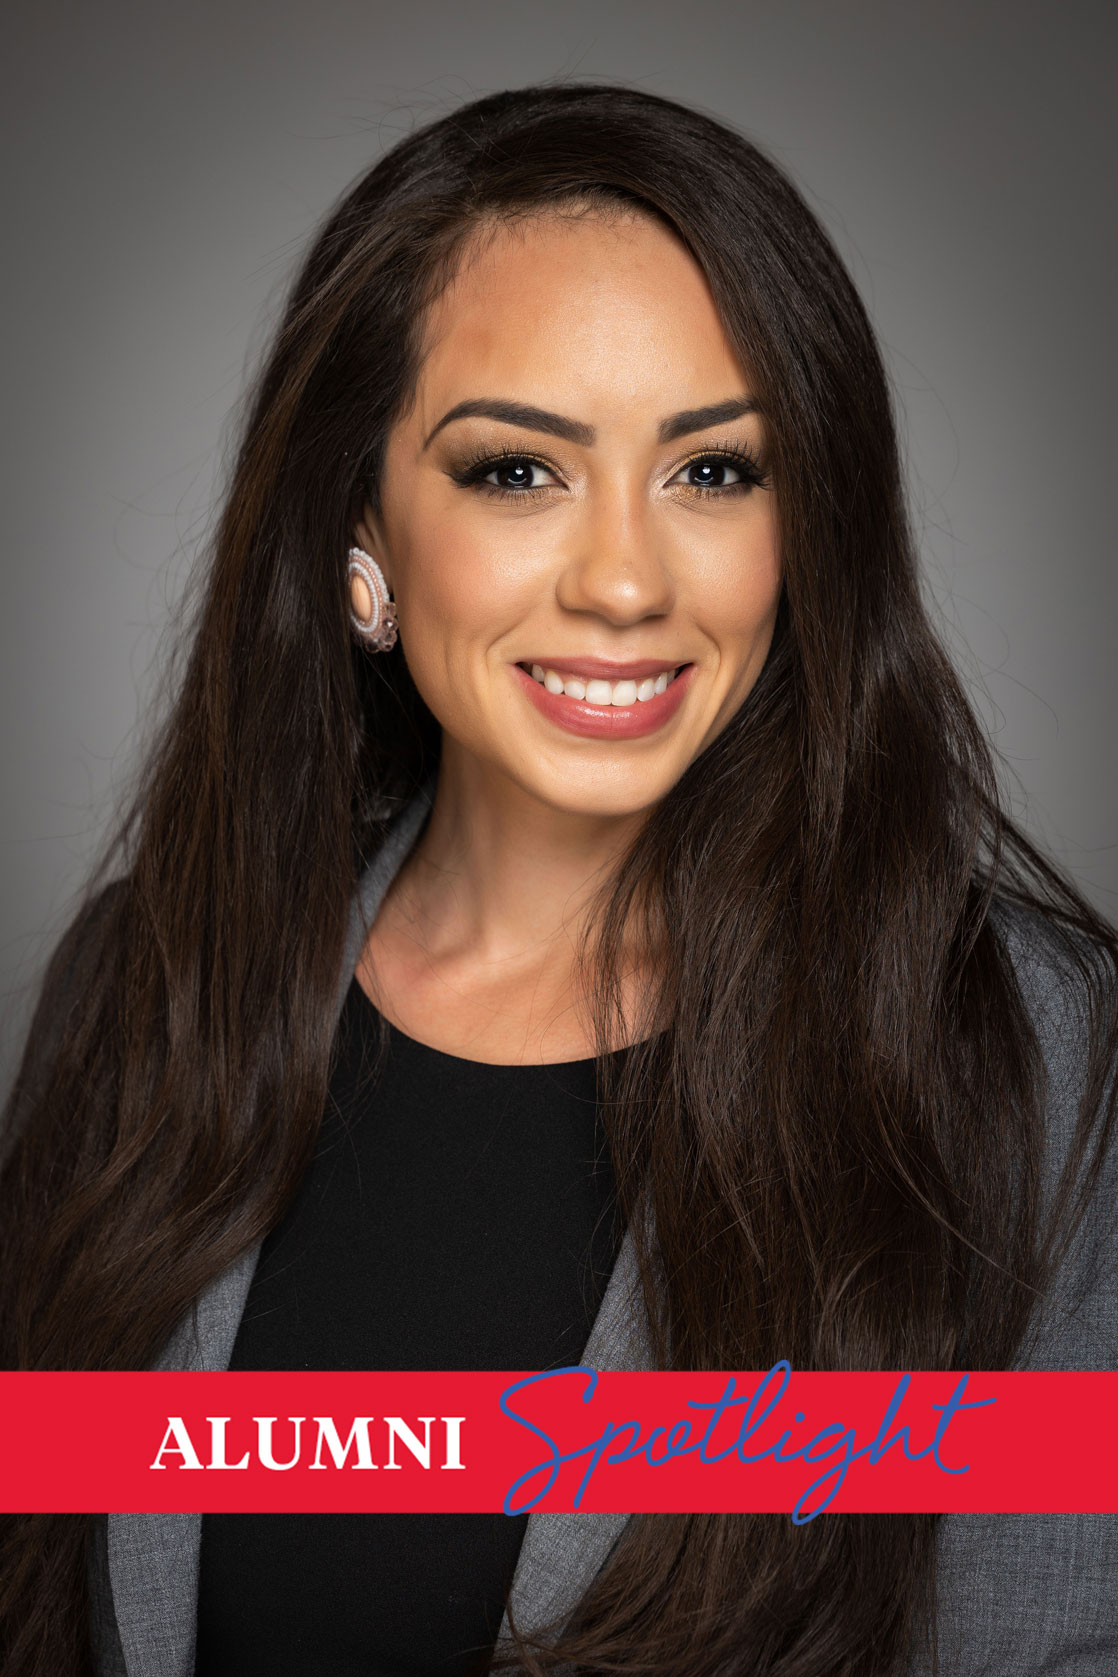 Alum Willow Blythe-Carroll was recently named a 2023 “Native American 40 Under 40” by the National Center for American Indian Enterprise Development.